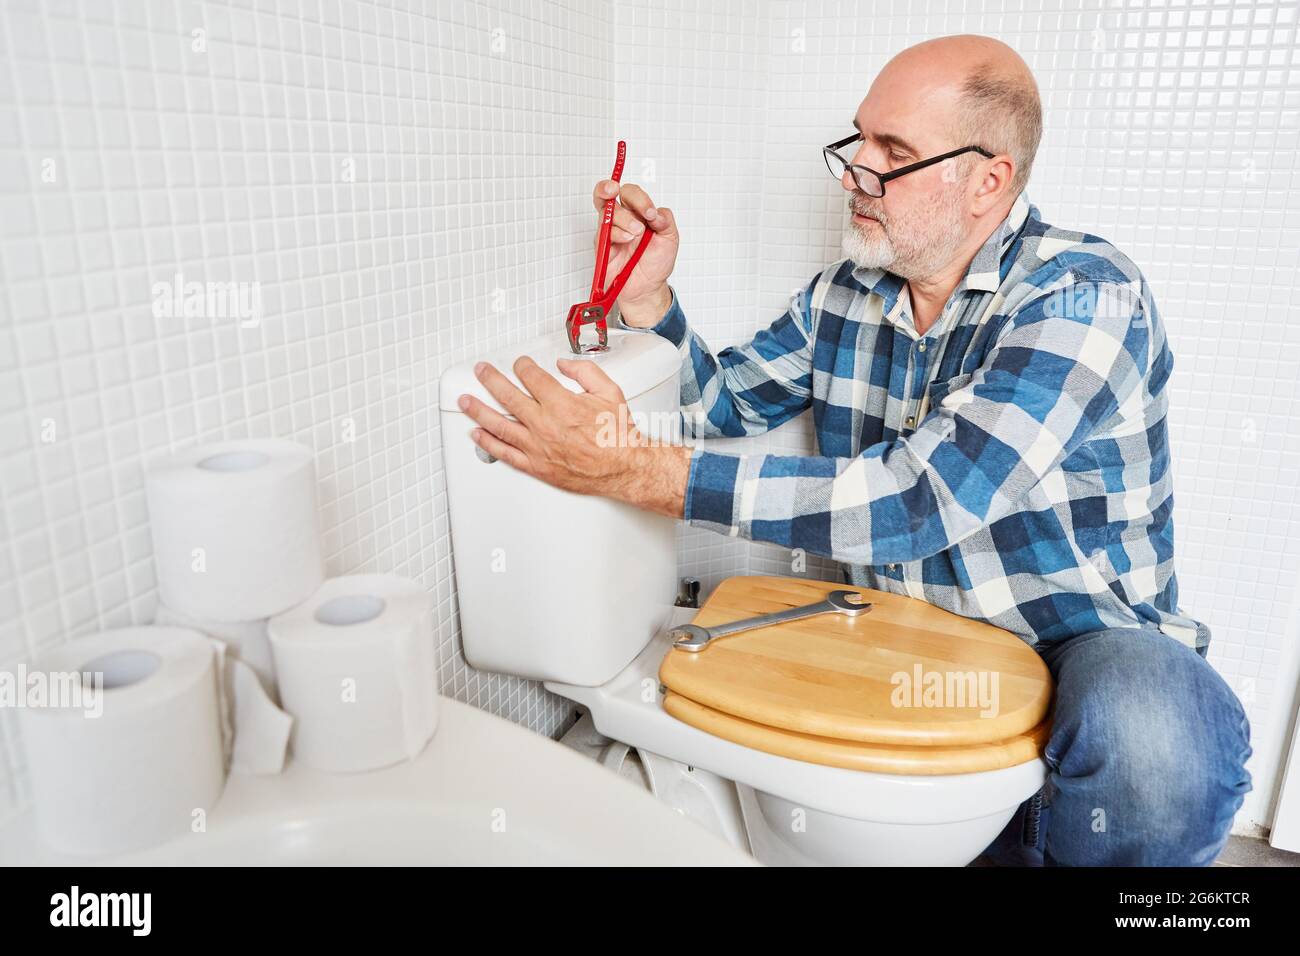 Craftsman or do-it-yourselfer with pipe wrench repairs the cistern in the toilet Stock Photo